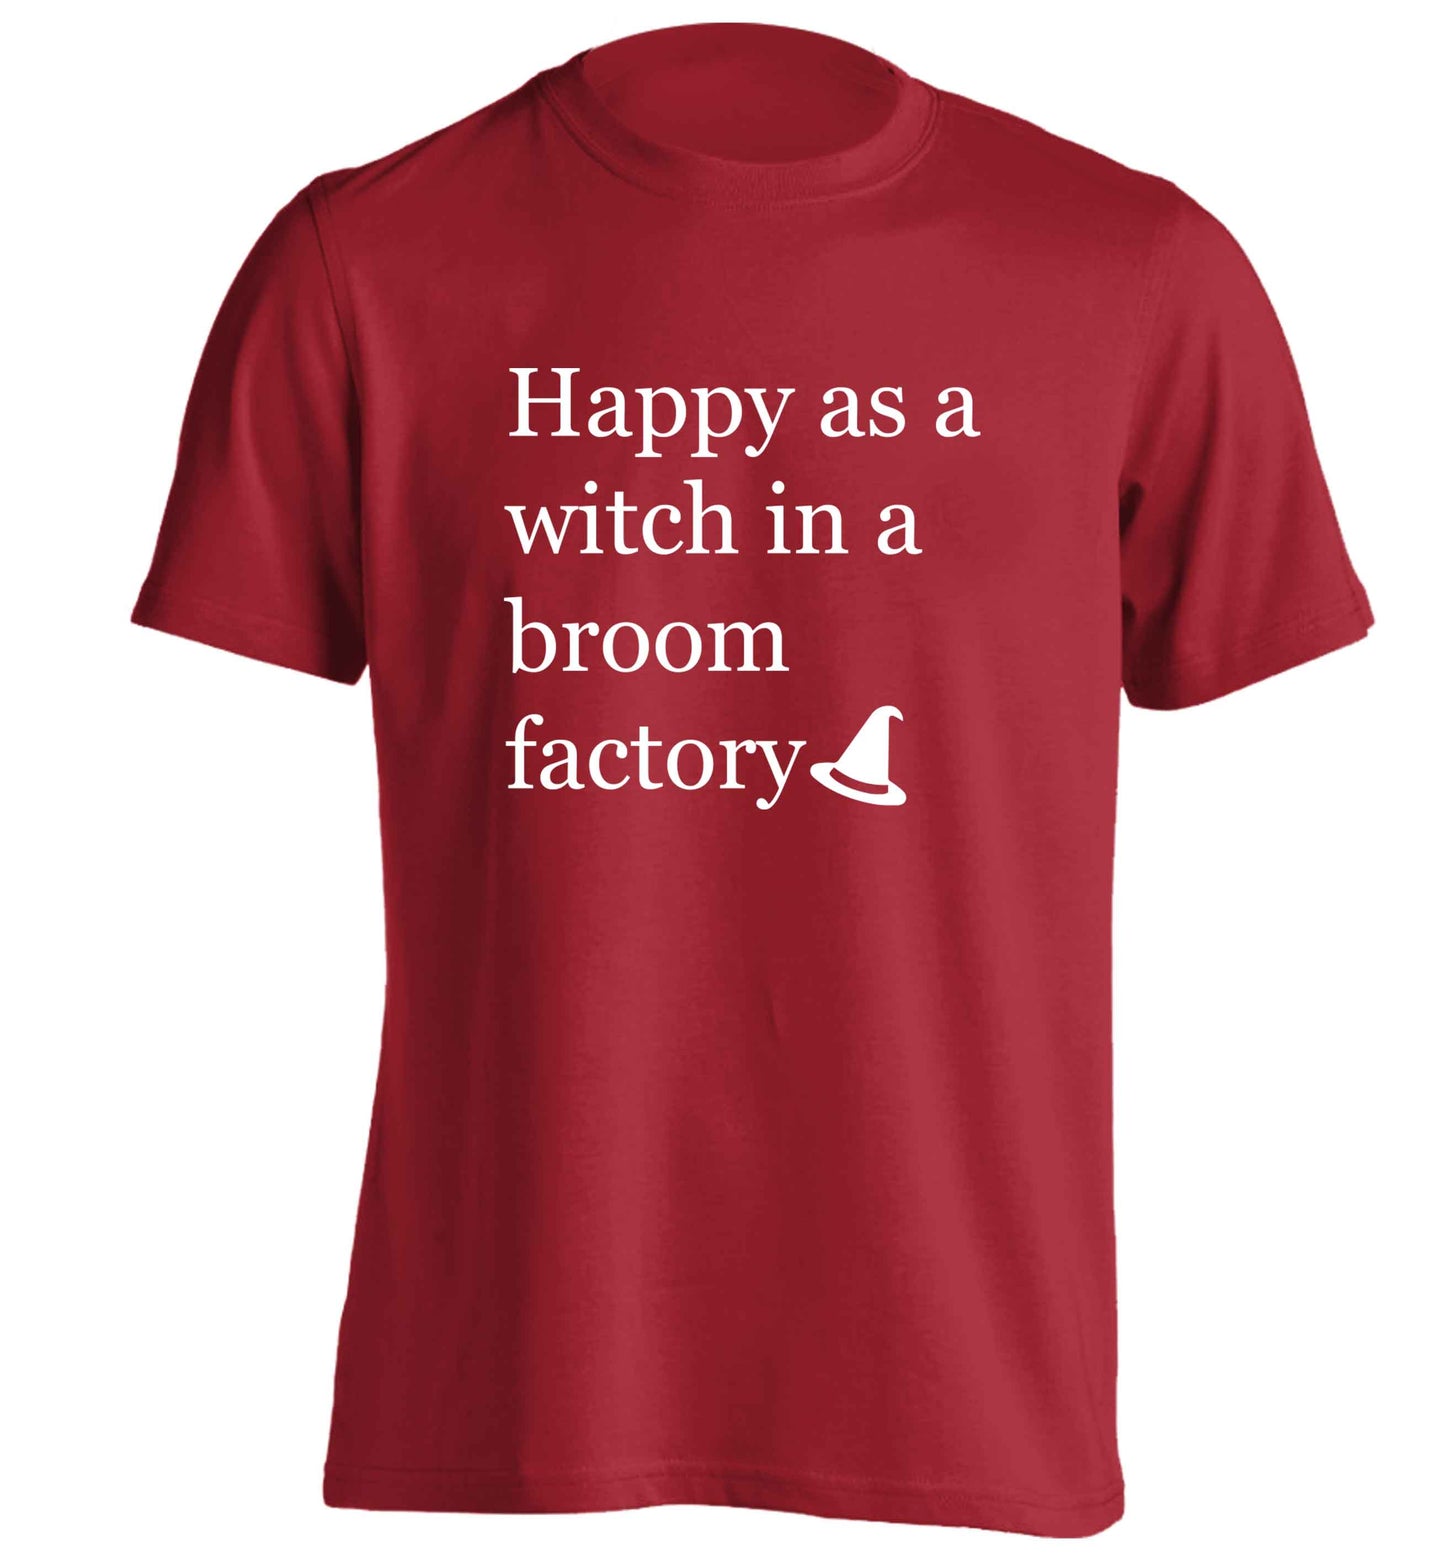 Happy as a witch in a broom factory adults unisex red Tshirt 2XL